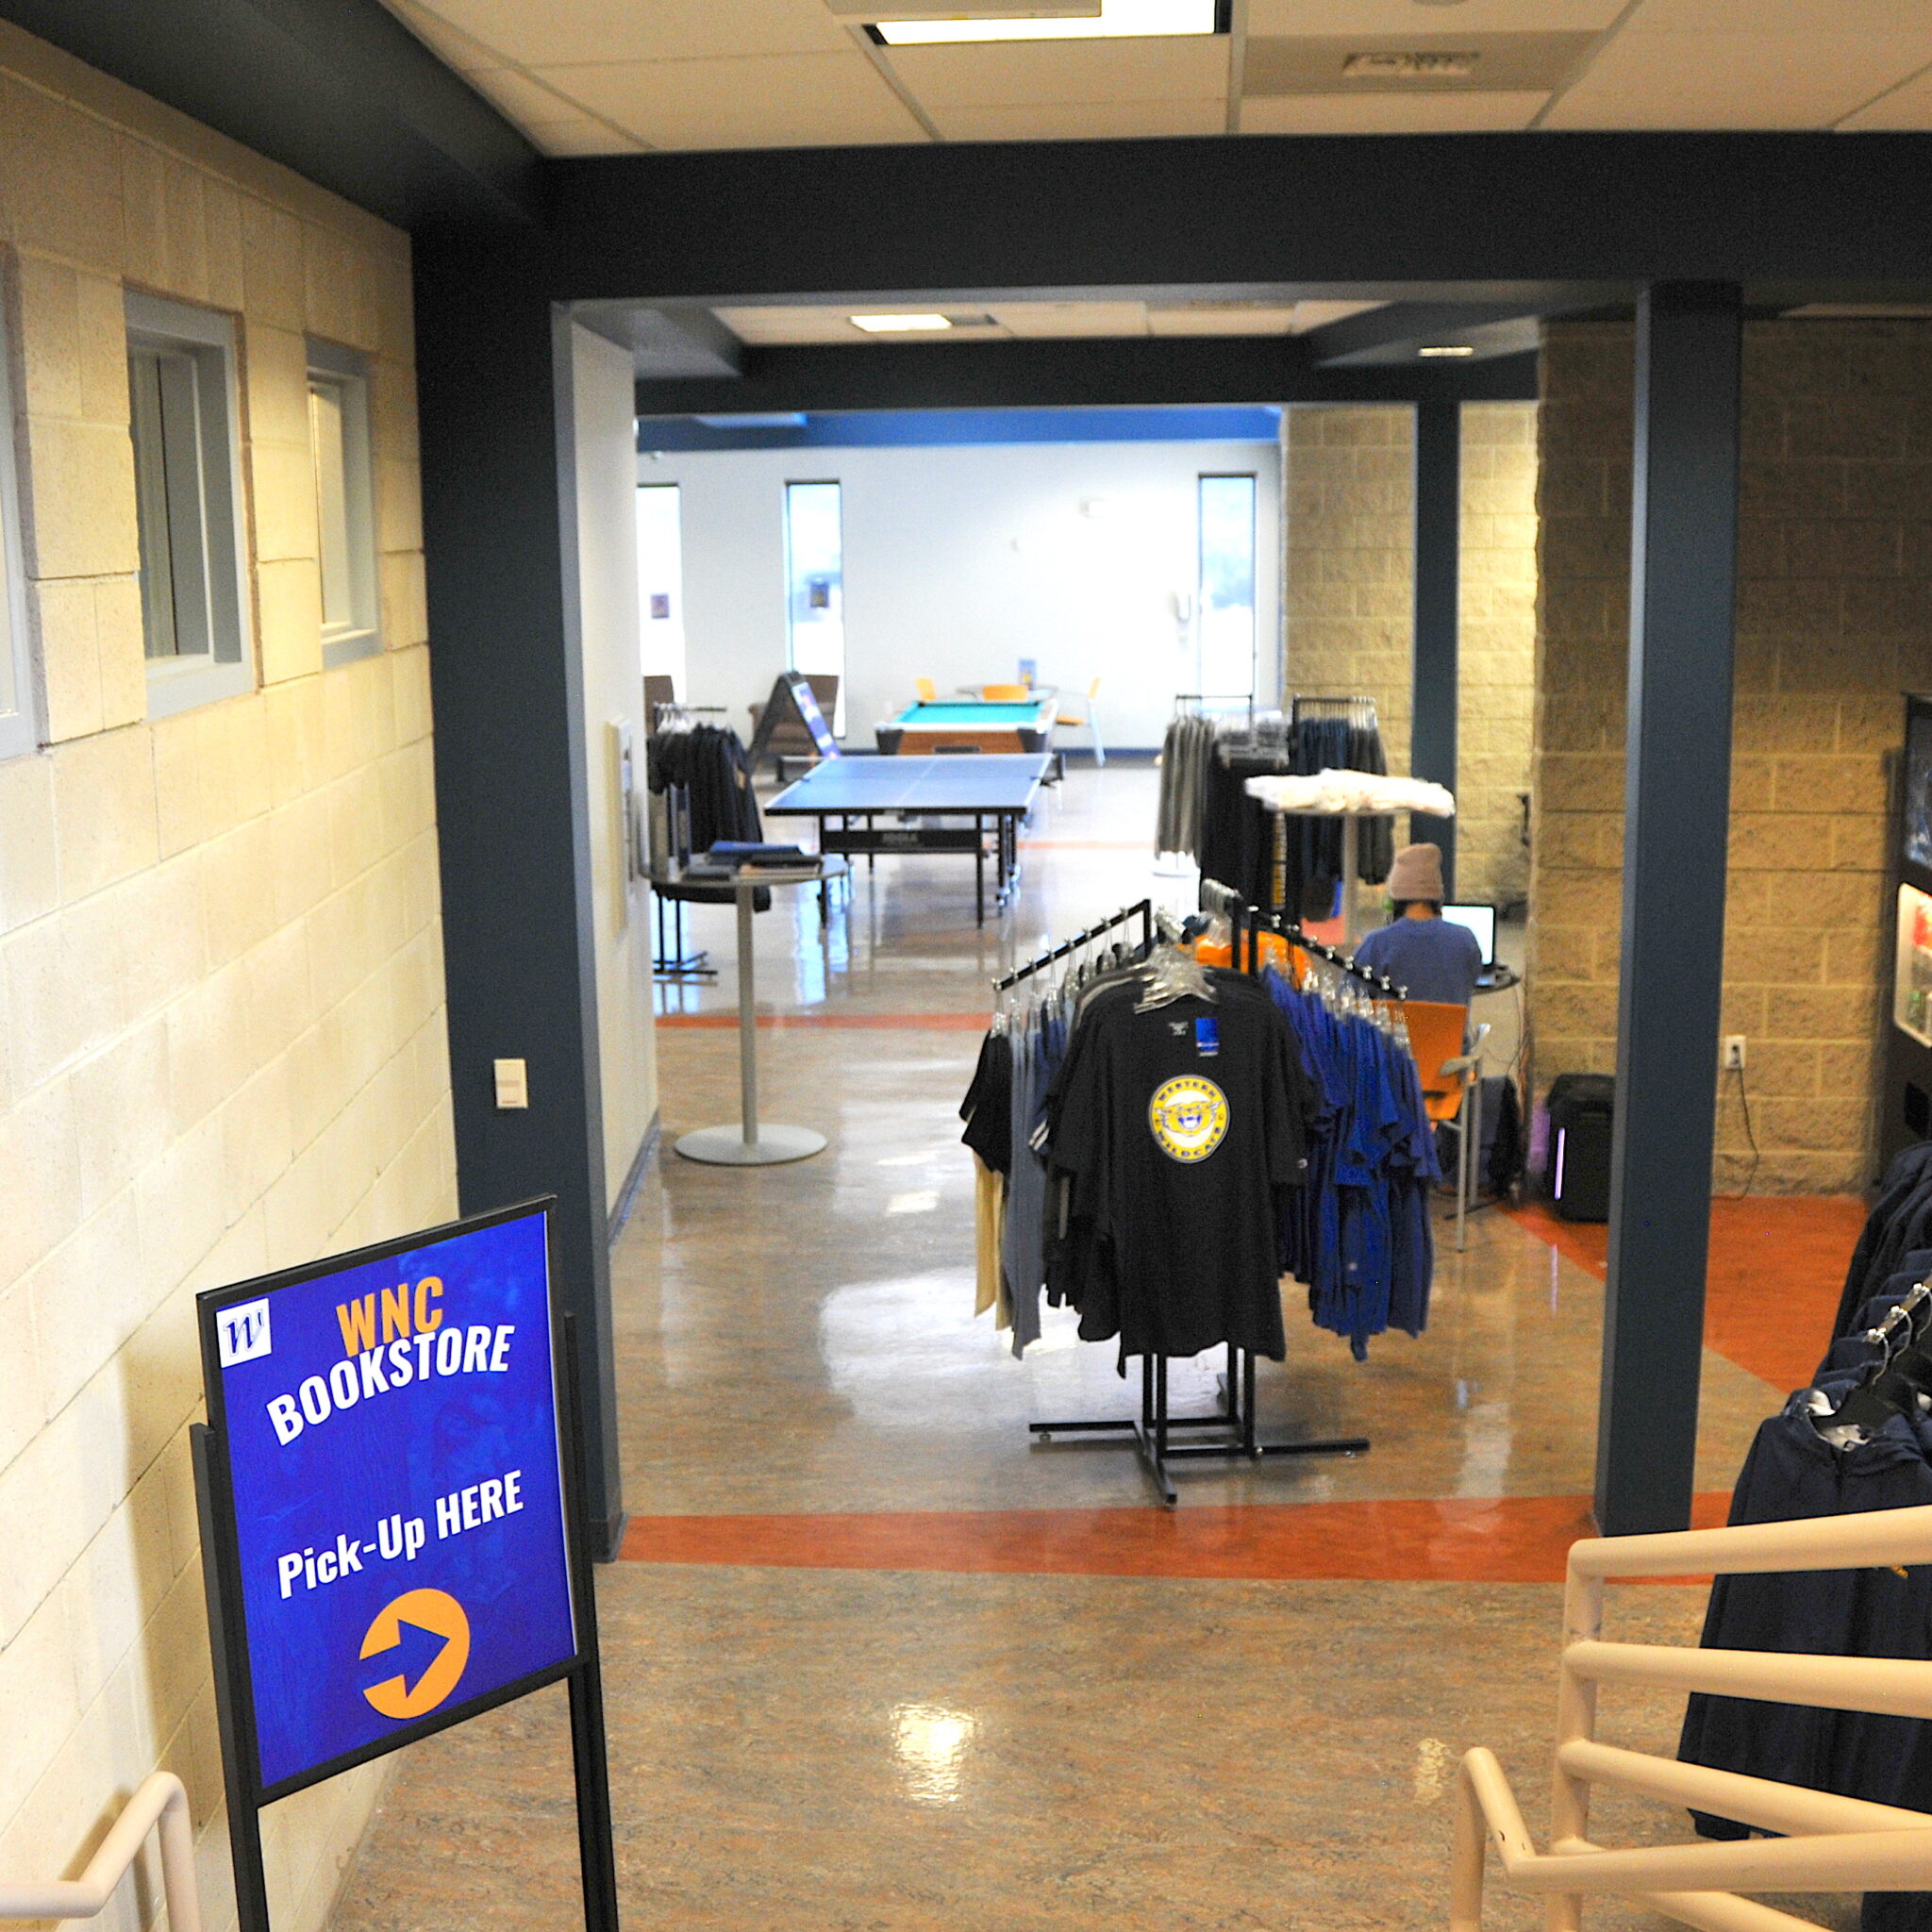 Dates Announced for Pop-up Store on WNC Campus